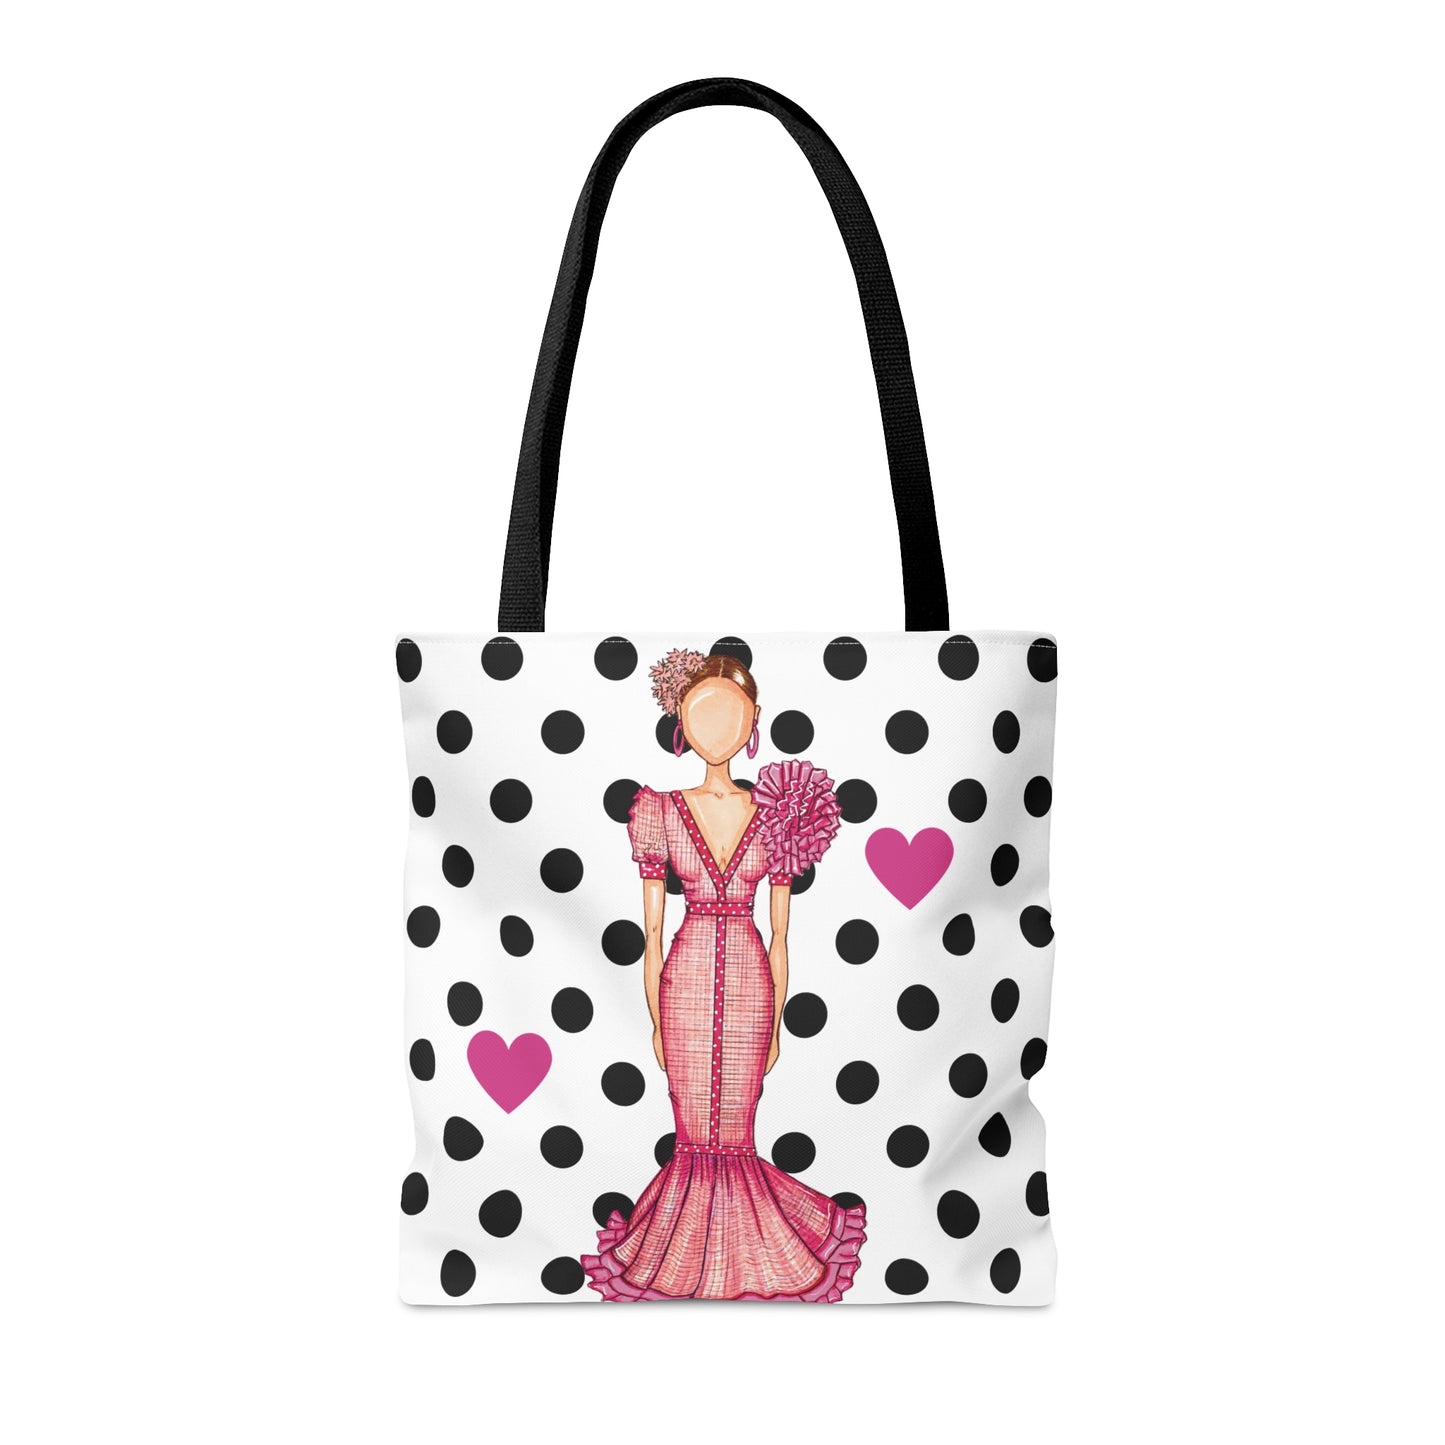 a tote bag with a lady in a polka dot dress